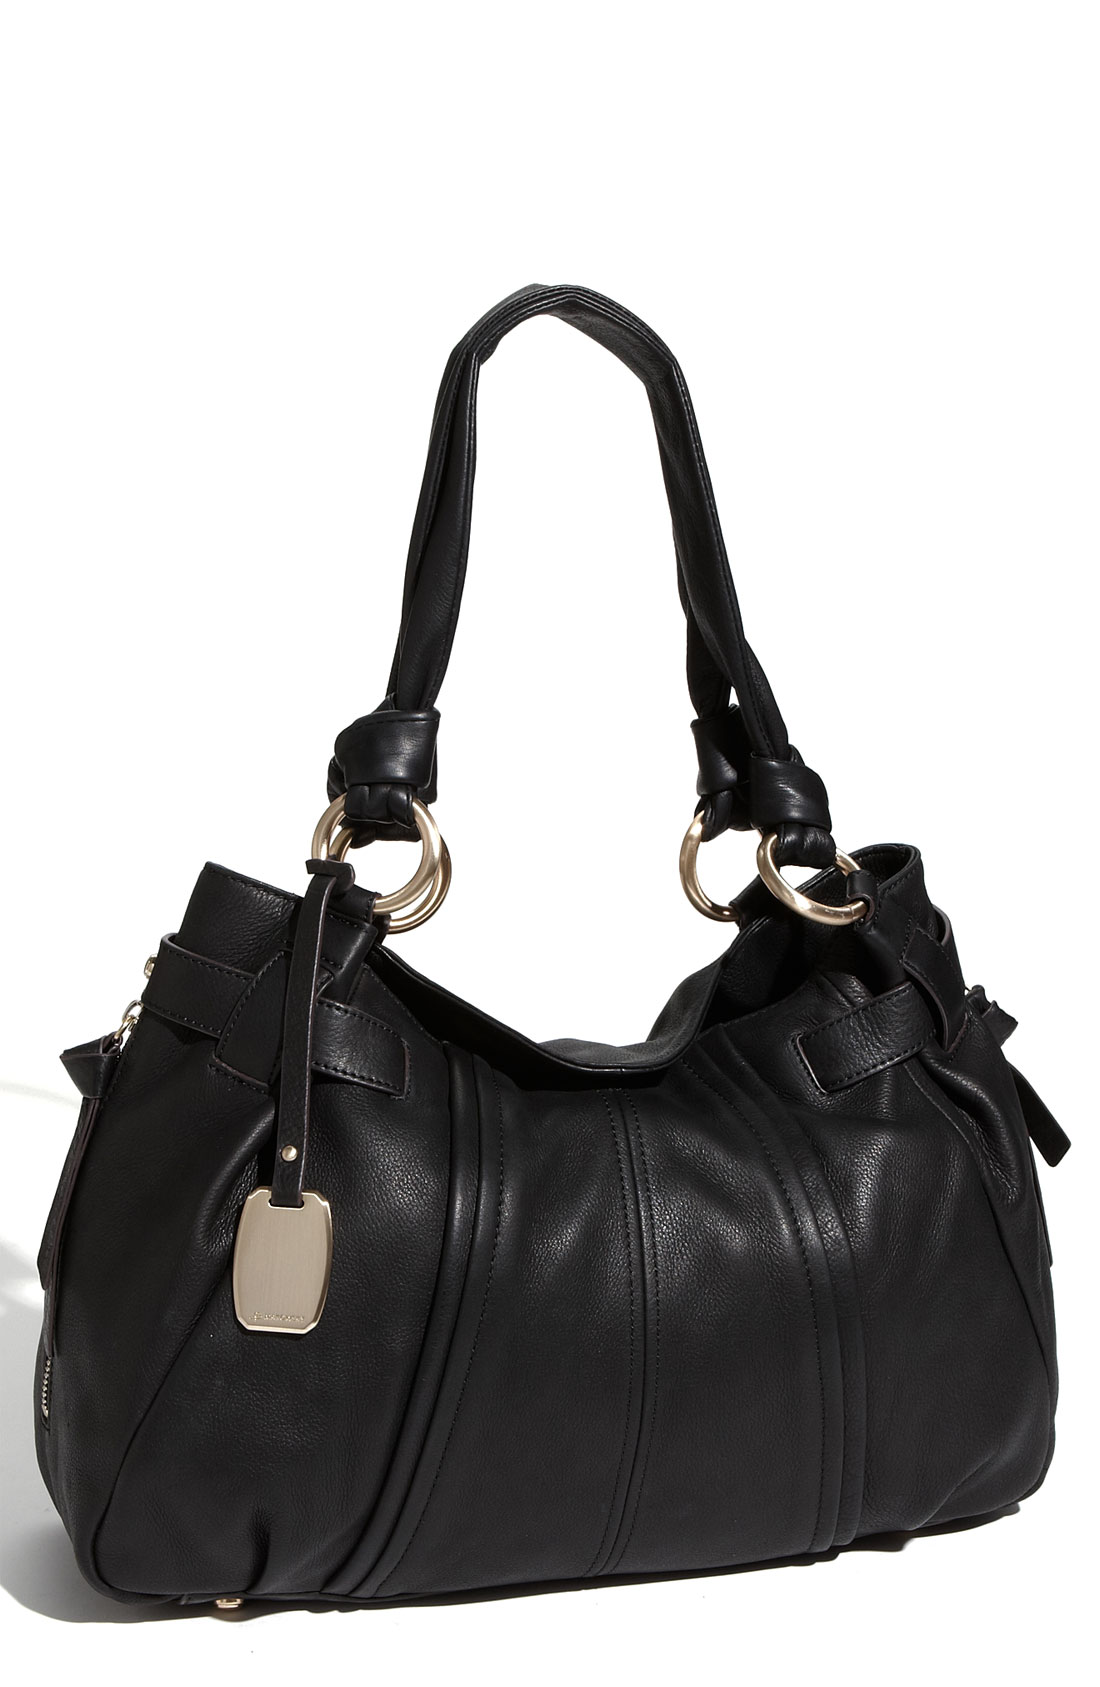 B. Makowsky Bianca Leather Tote in Black | Lyst